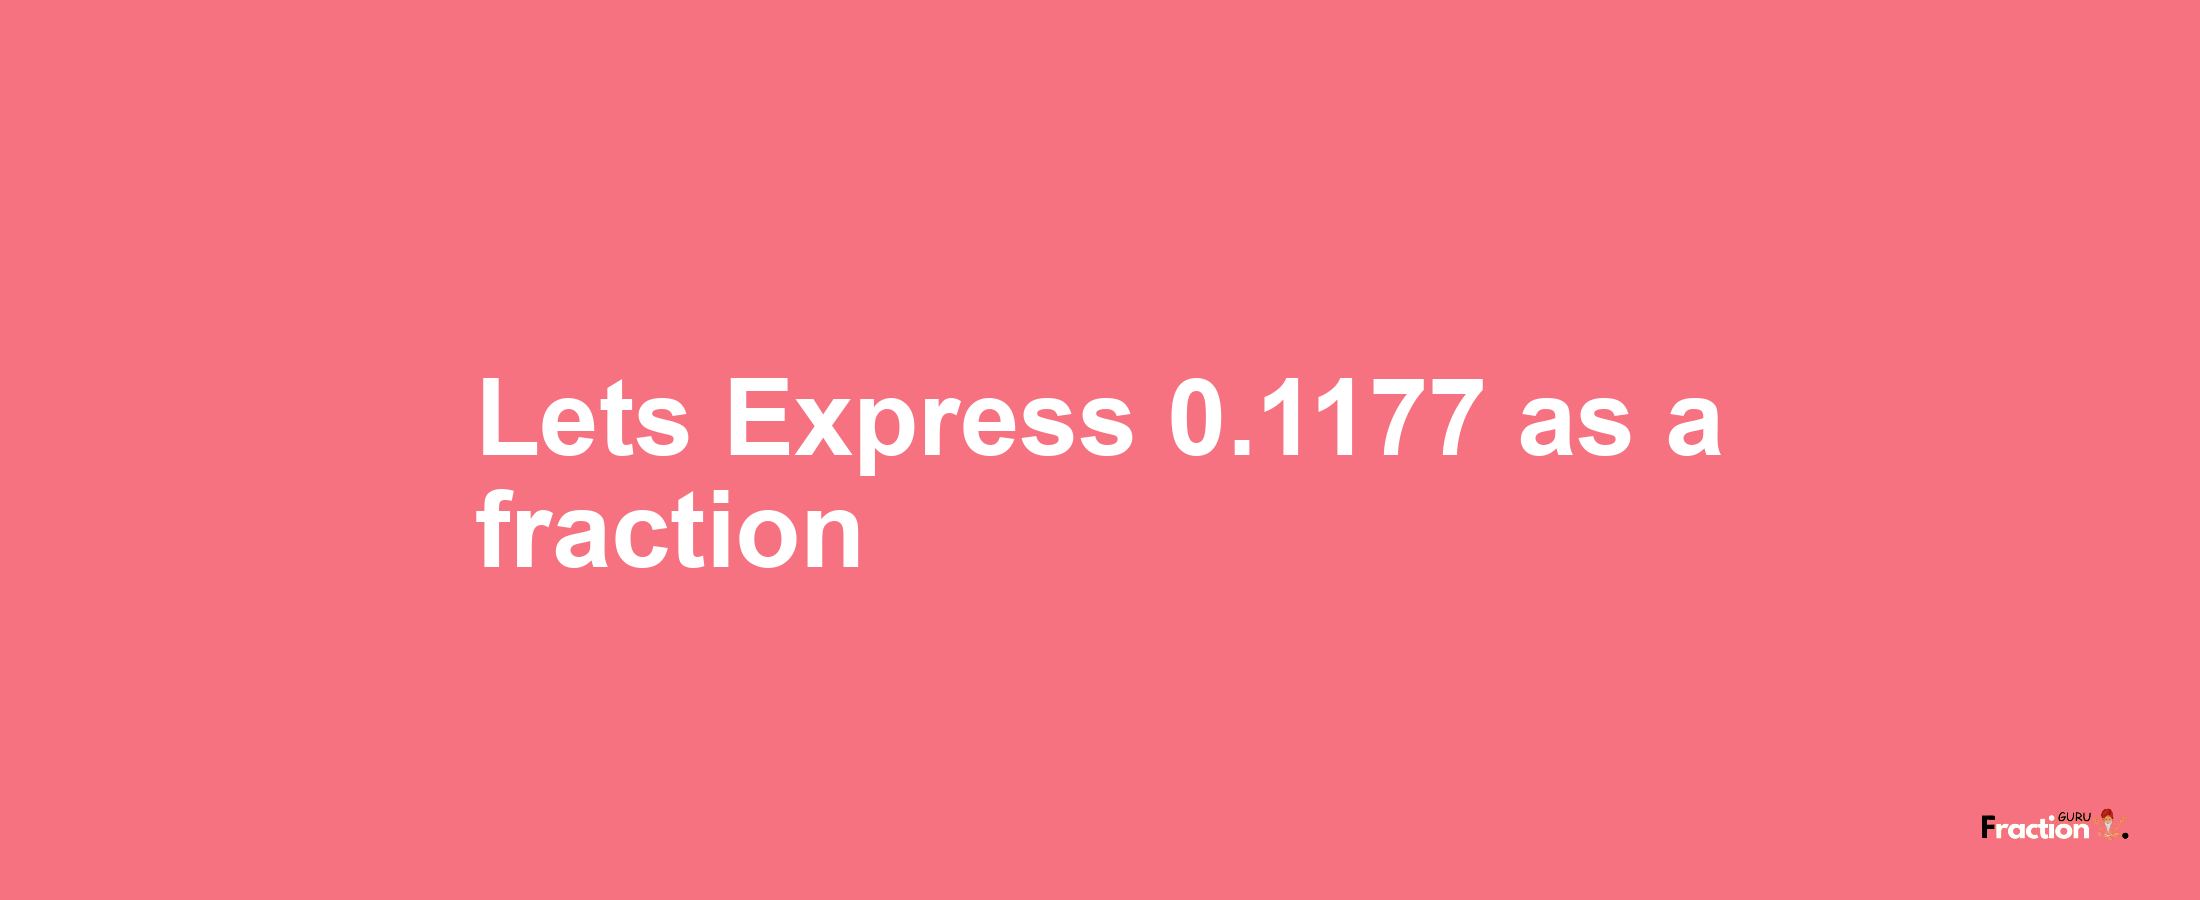 Lets Express 0.1177 as afraction